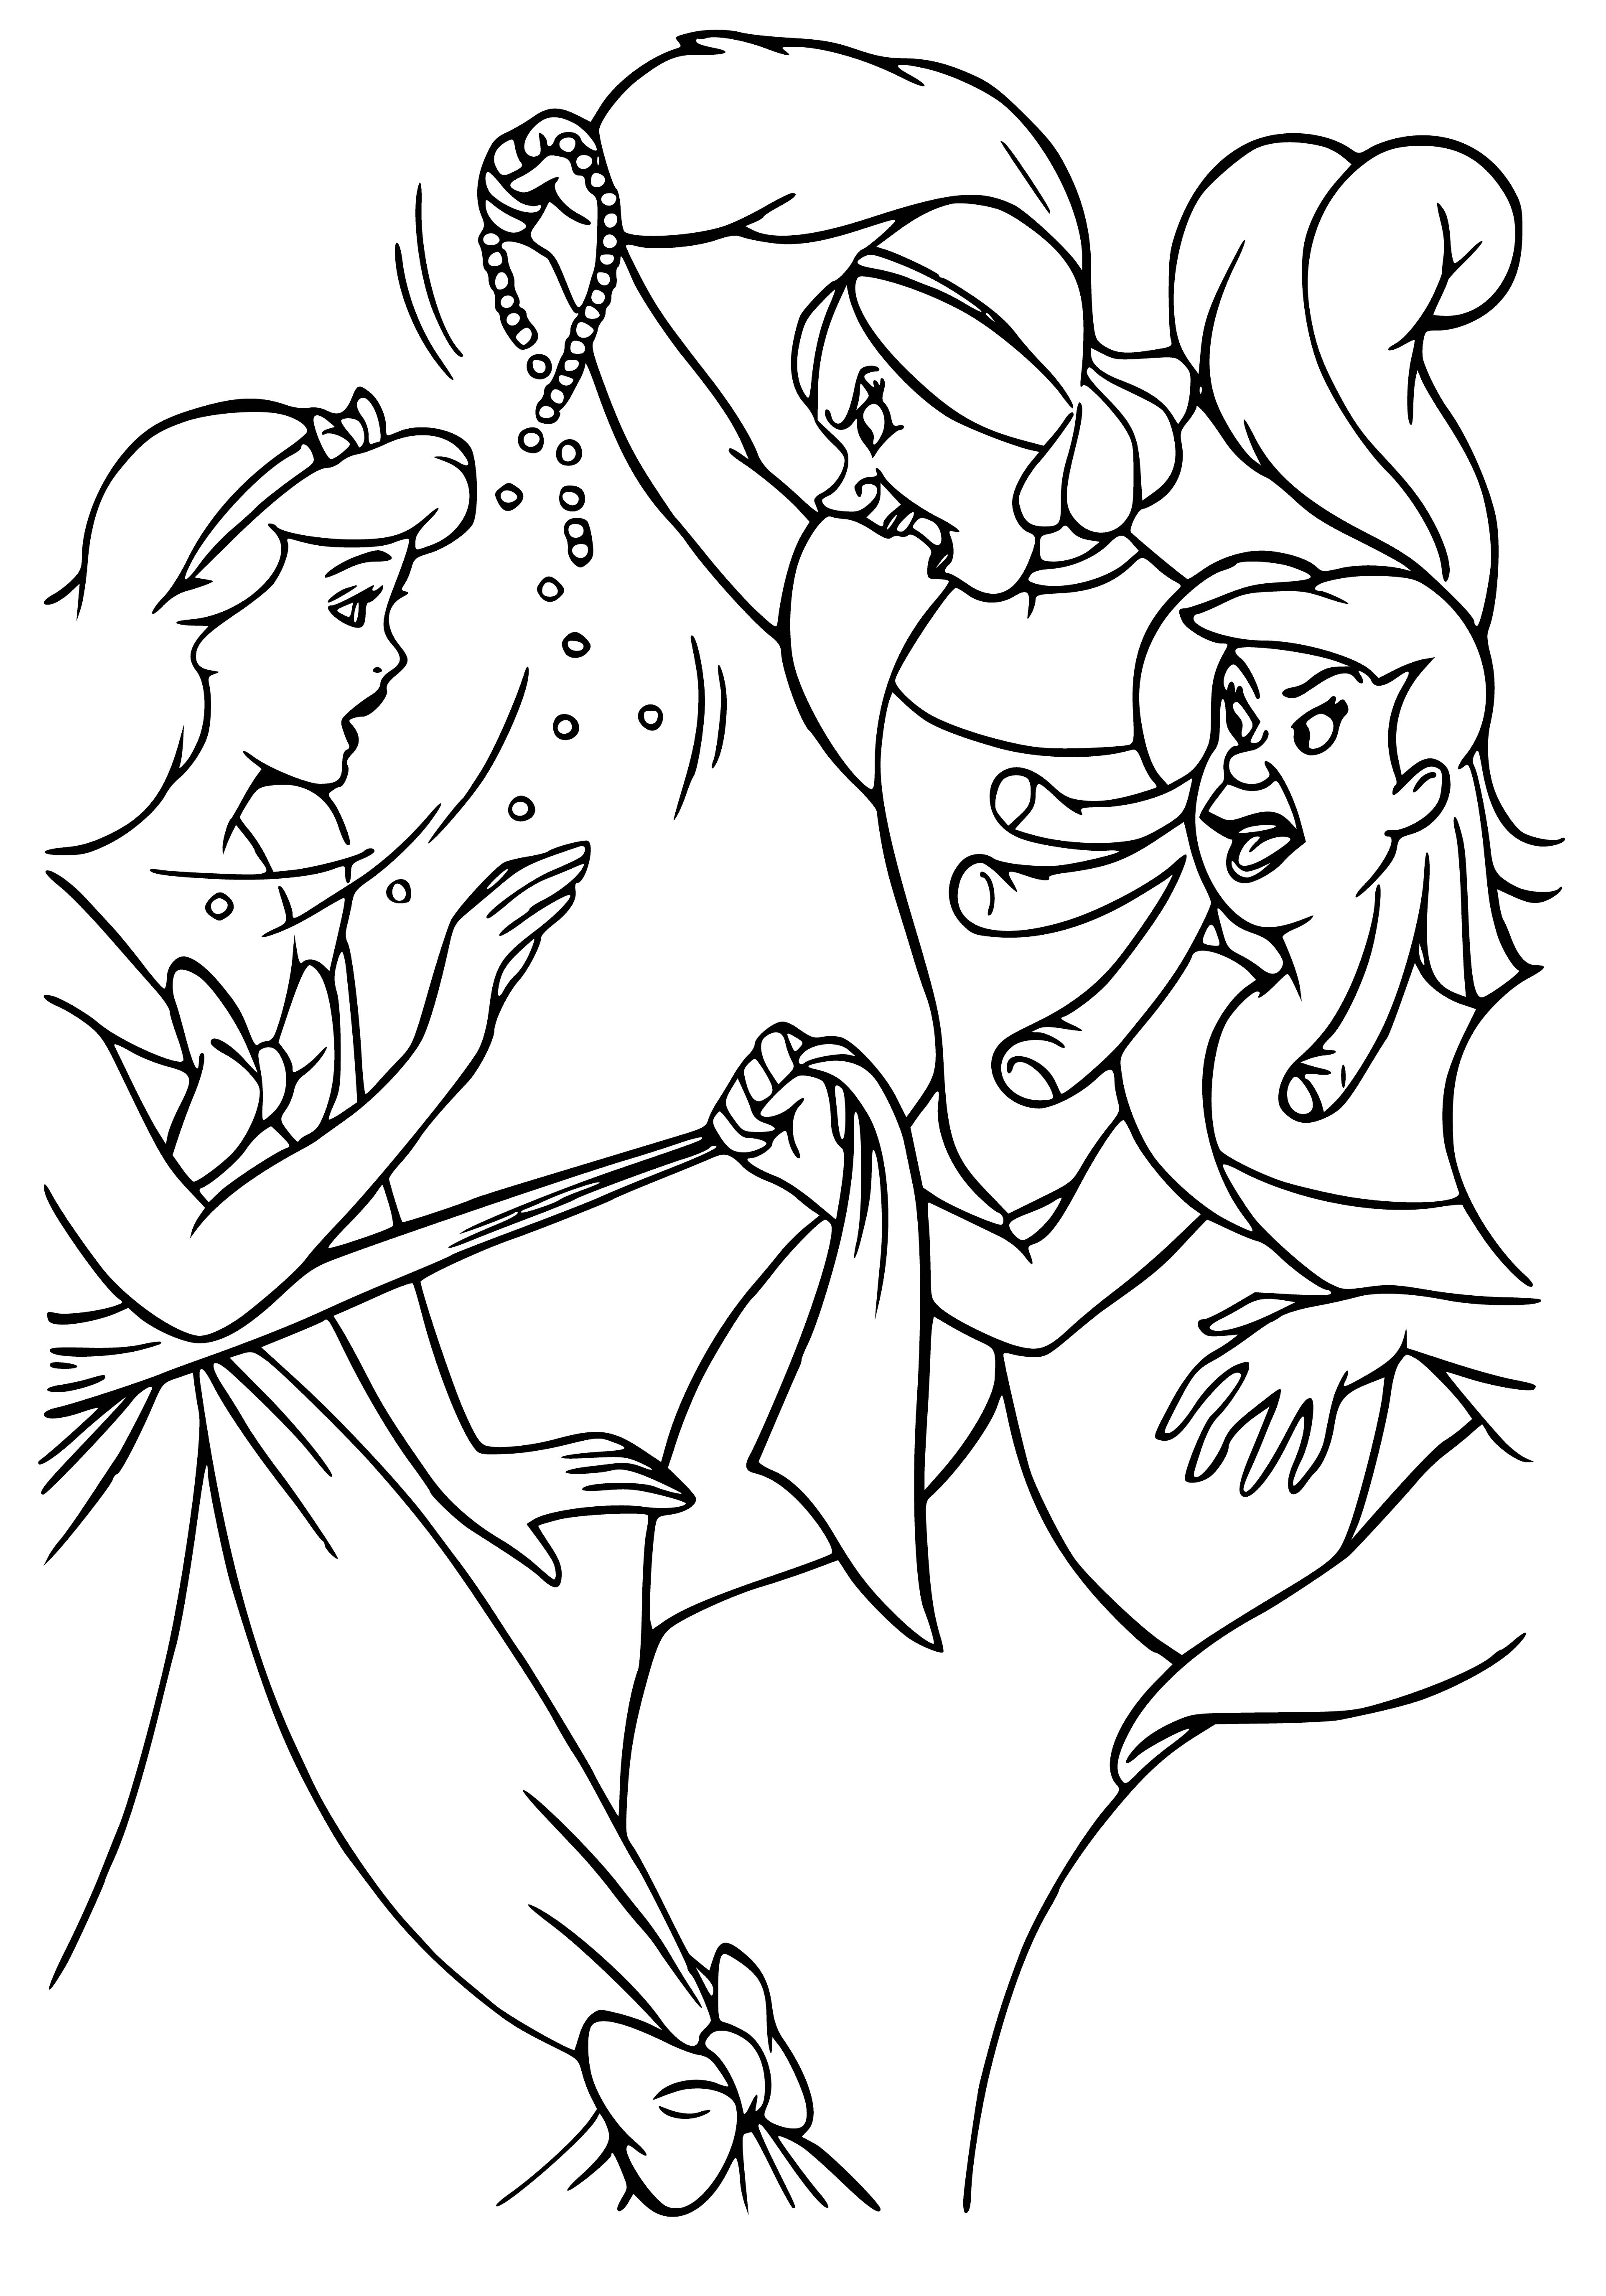 The ugly sisters spoil the dress coloring page